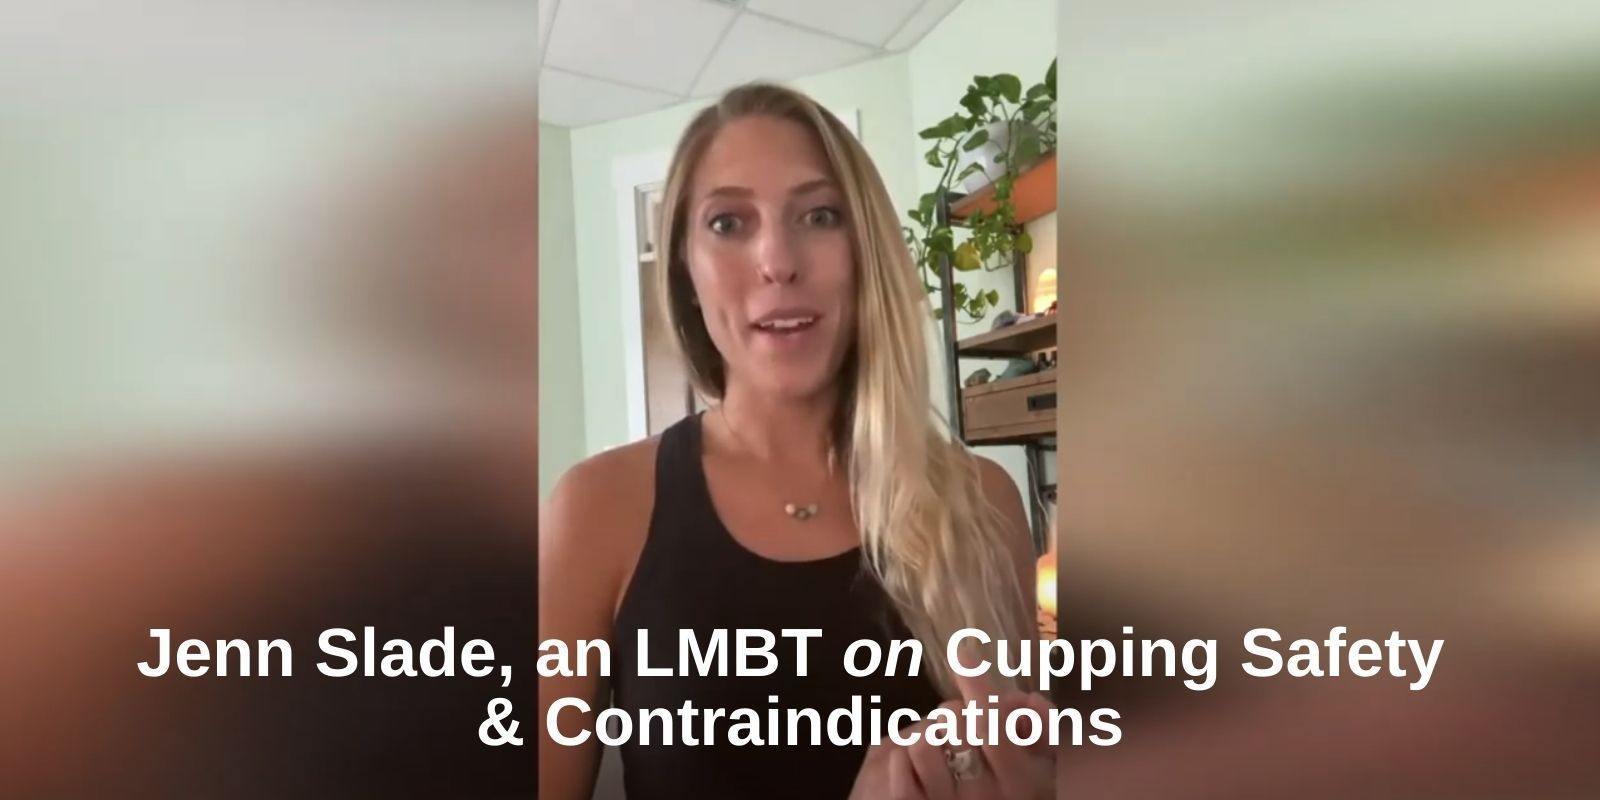 GO CUP YOURSELF Part 2: Cupping Safety - Lure Essentials